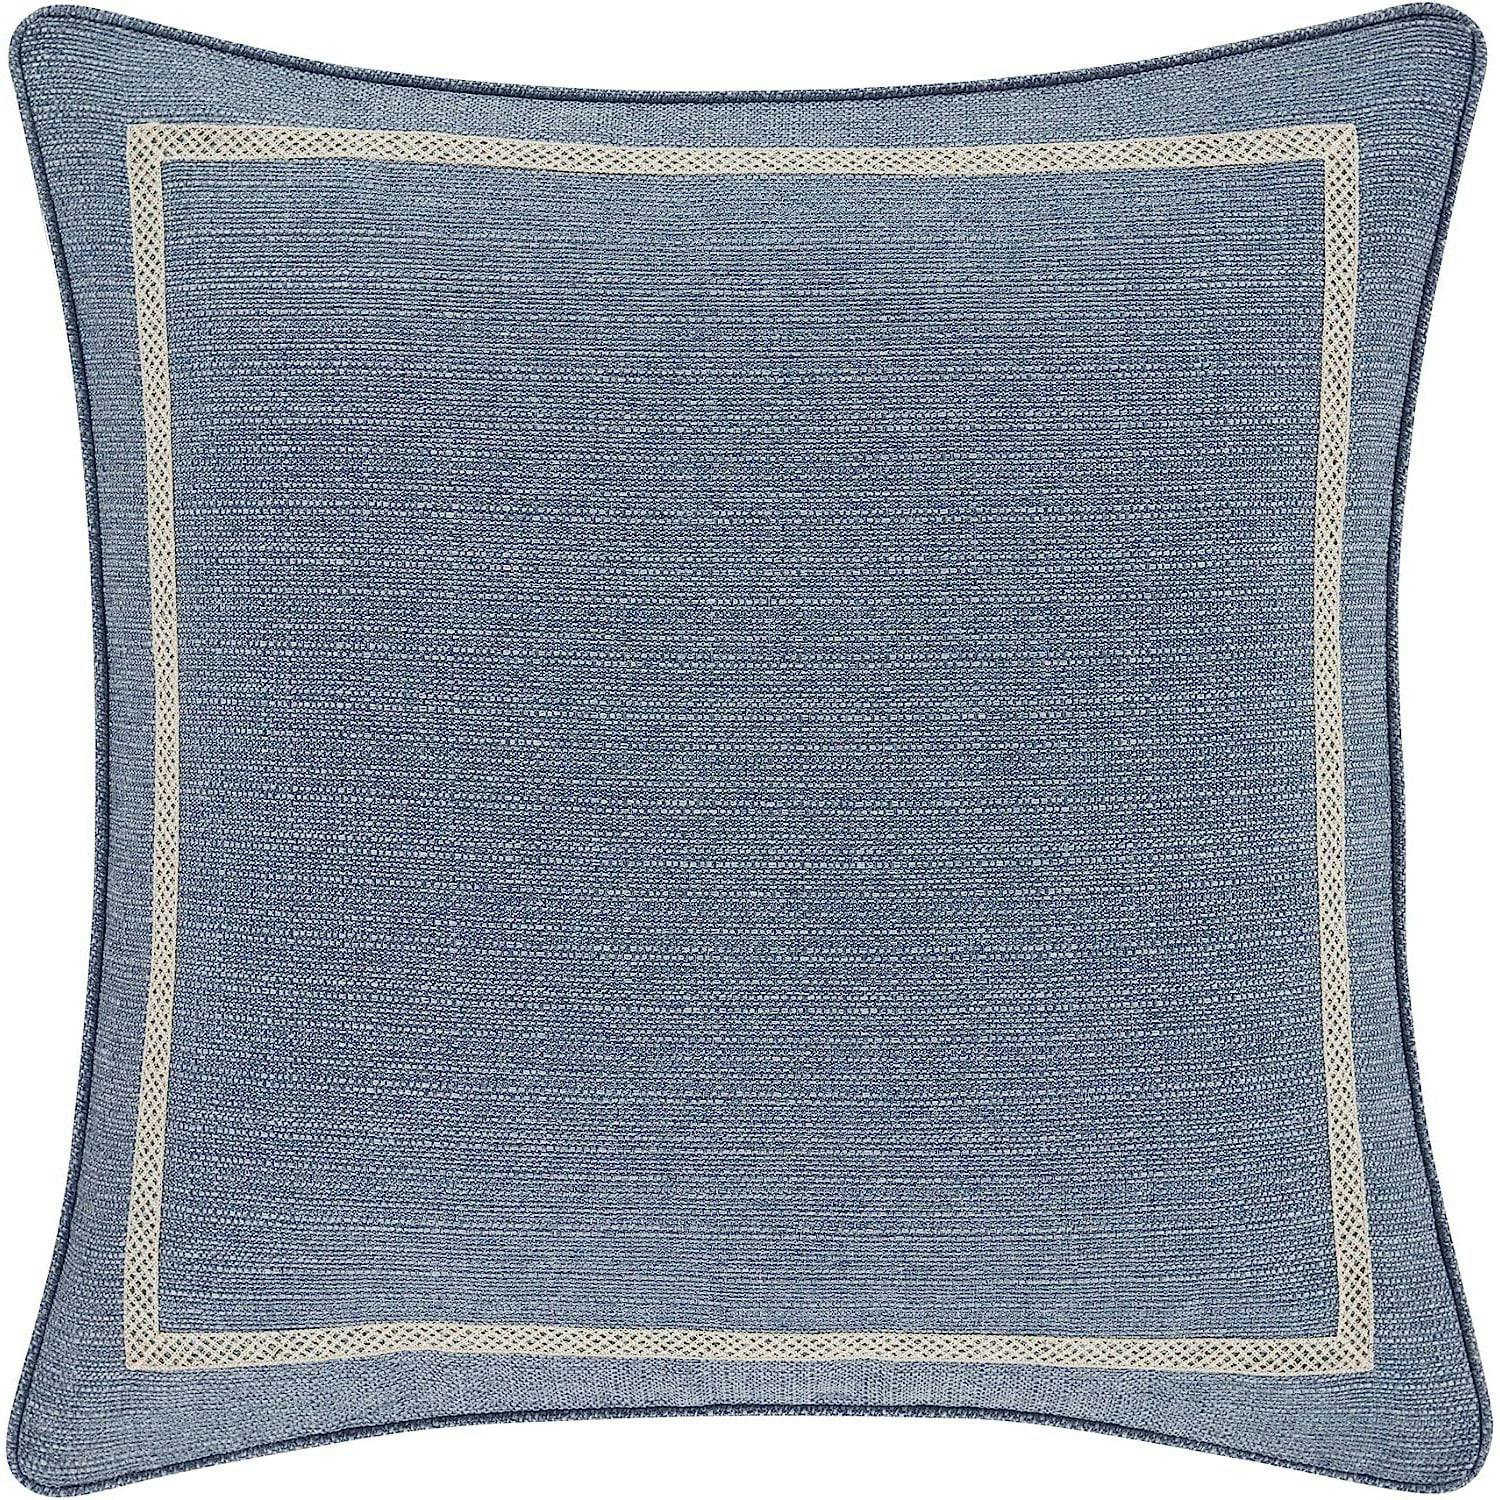 Augusta Embroidered Ivory and Blue Euro Sham, 26x26